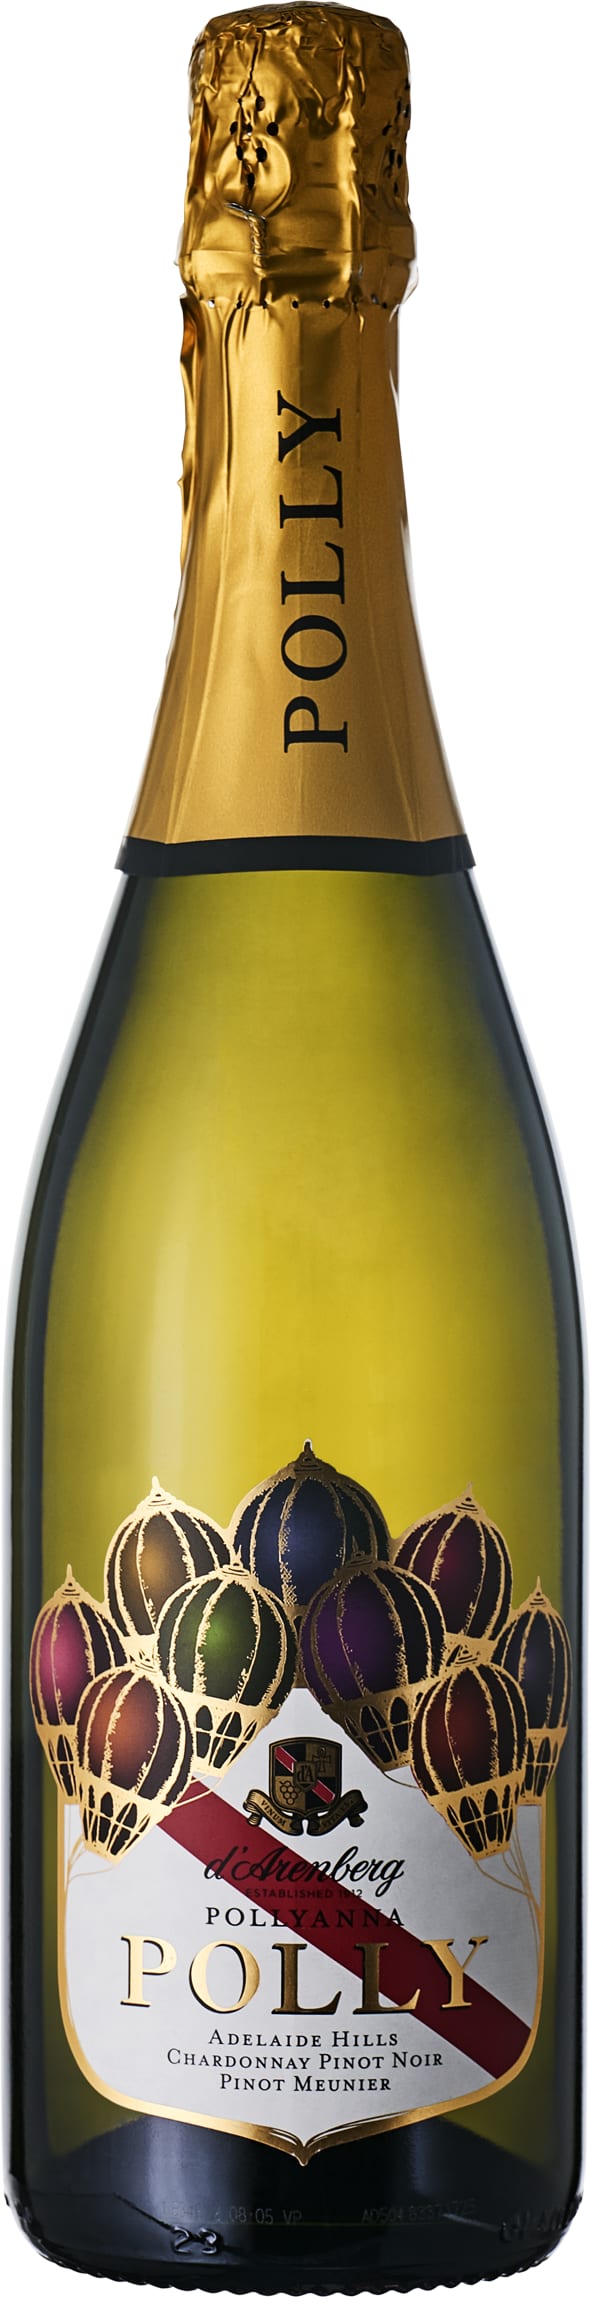 D Arenberg Pollyanna Polly 75cl NV - Buy D Arenberg Wines from GREAT WINES DIRECT wine shop